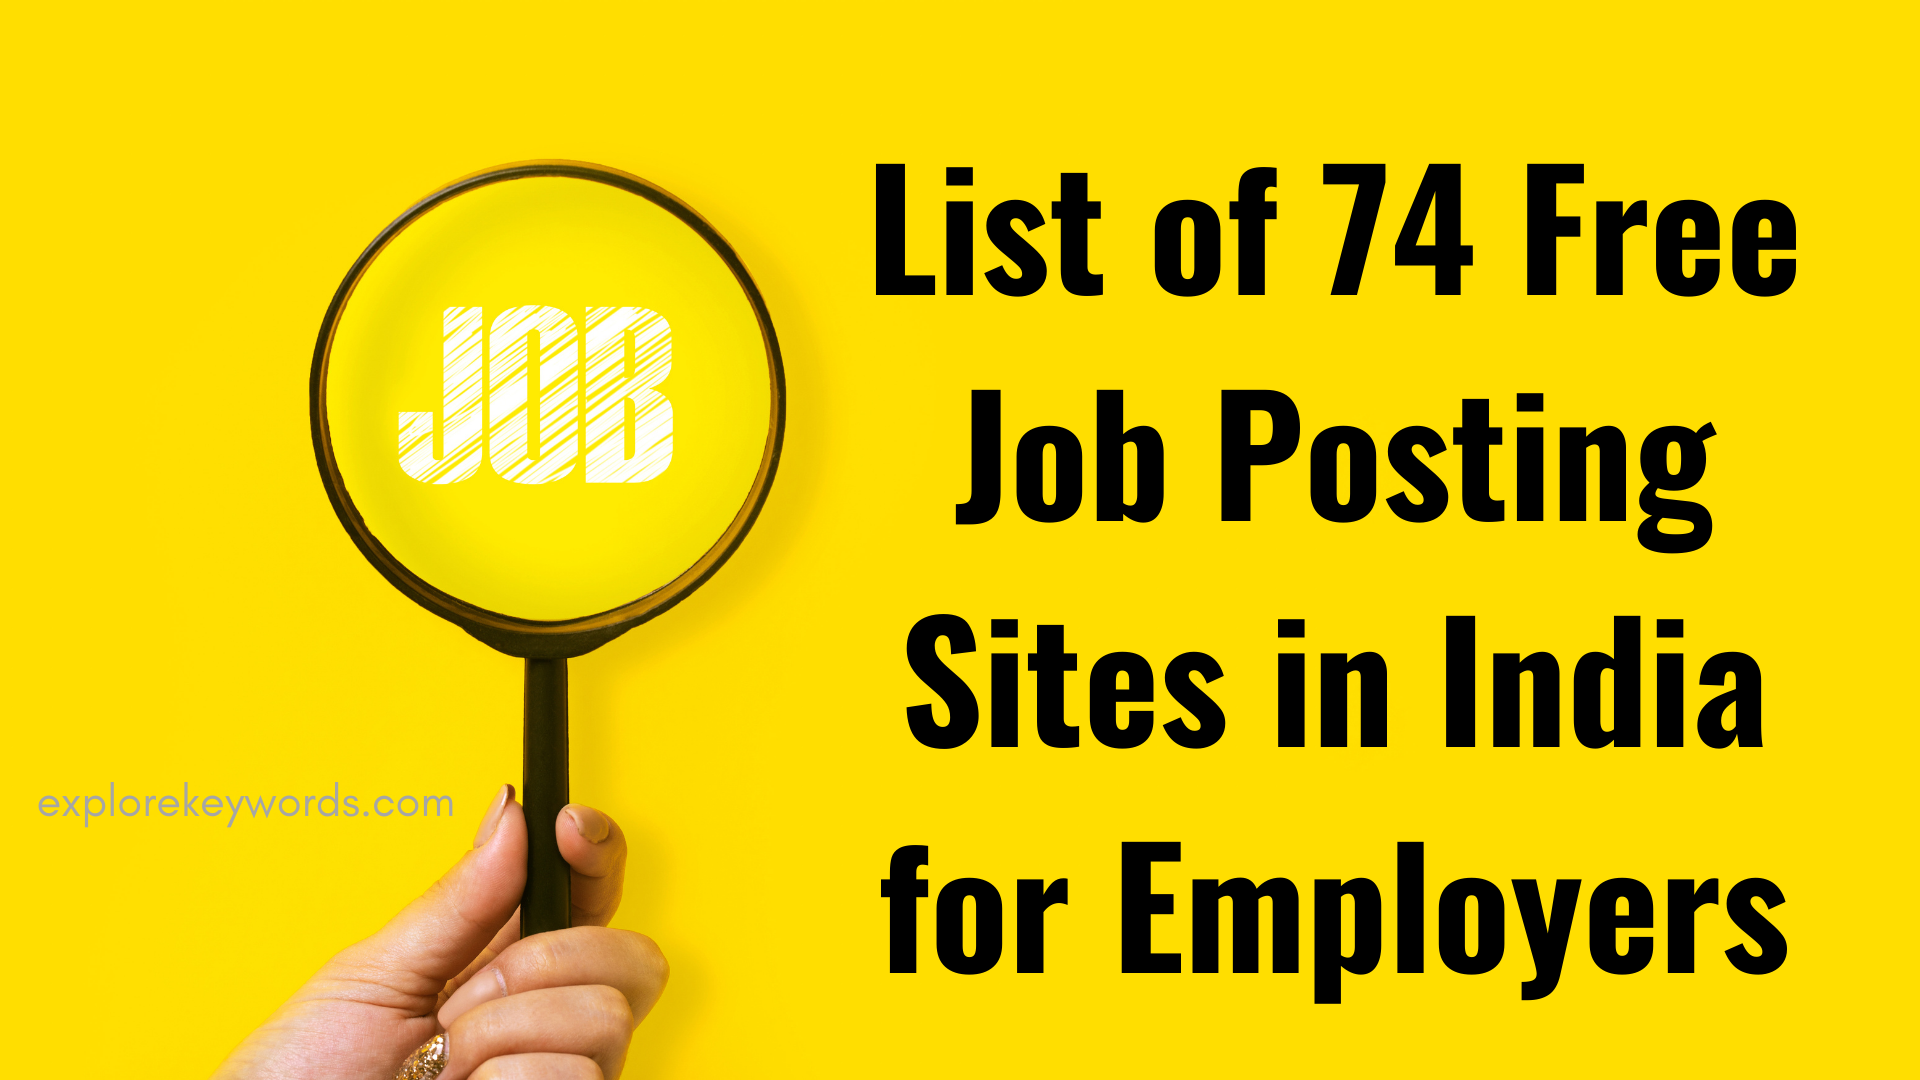 List of 74 Free Job Posting Sites in India for Employers